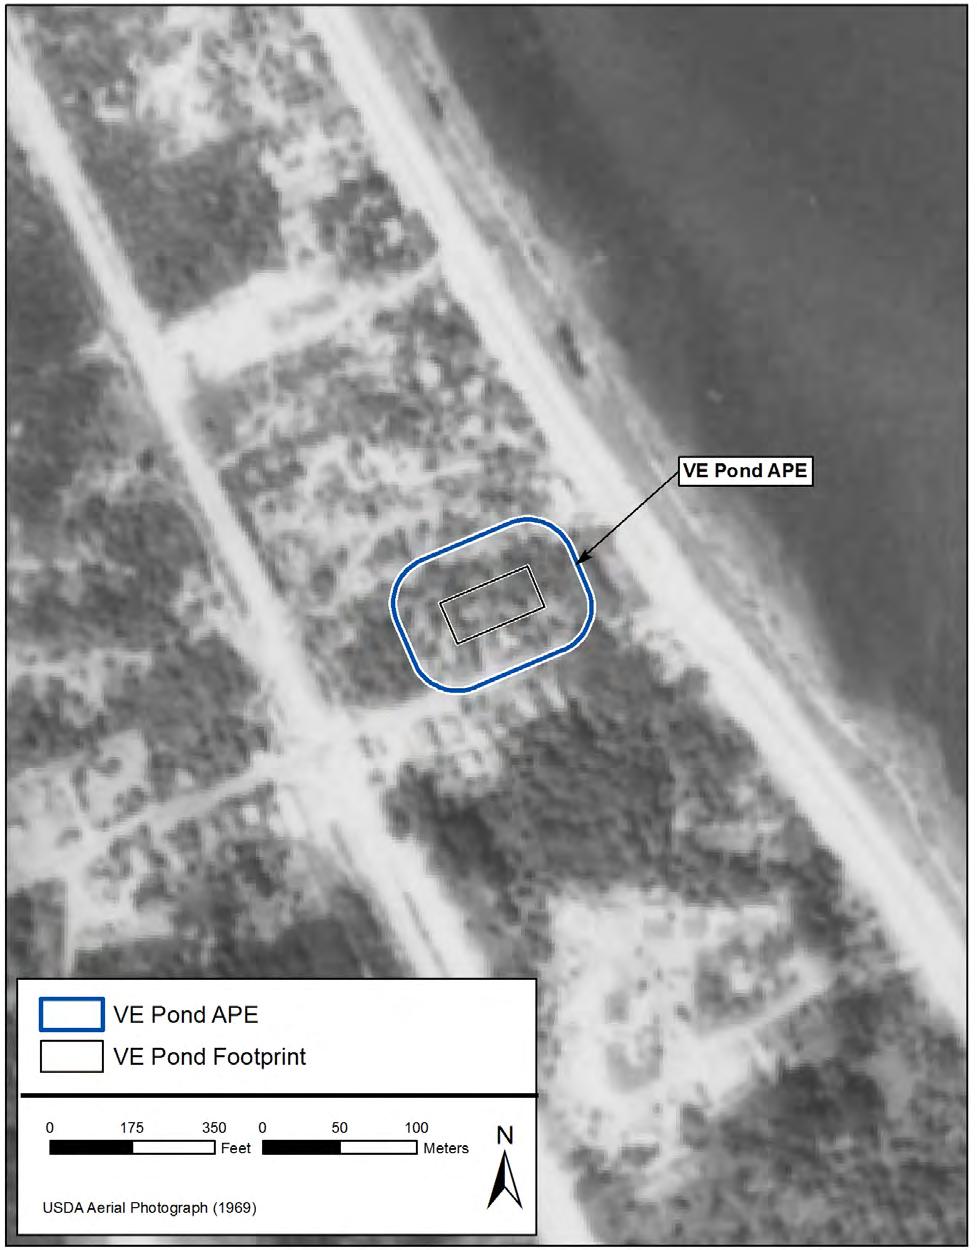 September 2015 SEARCH Final Report CRAS of Proposed VE Pond along SR 514, Brevard County, Florida